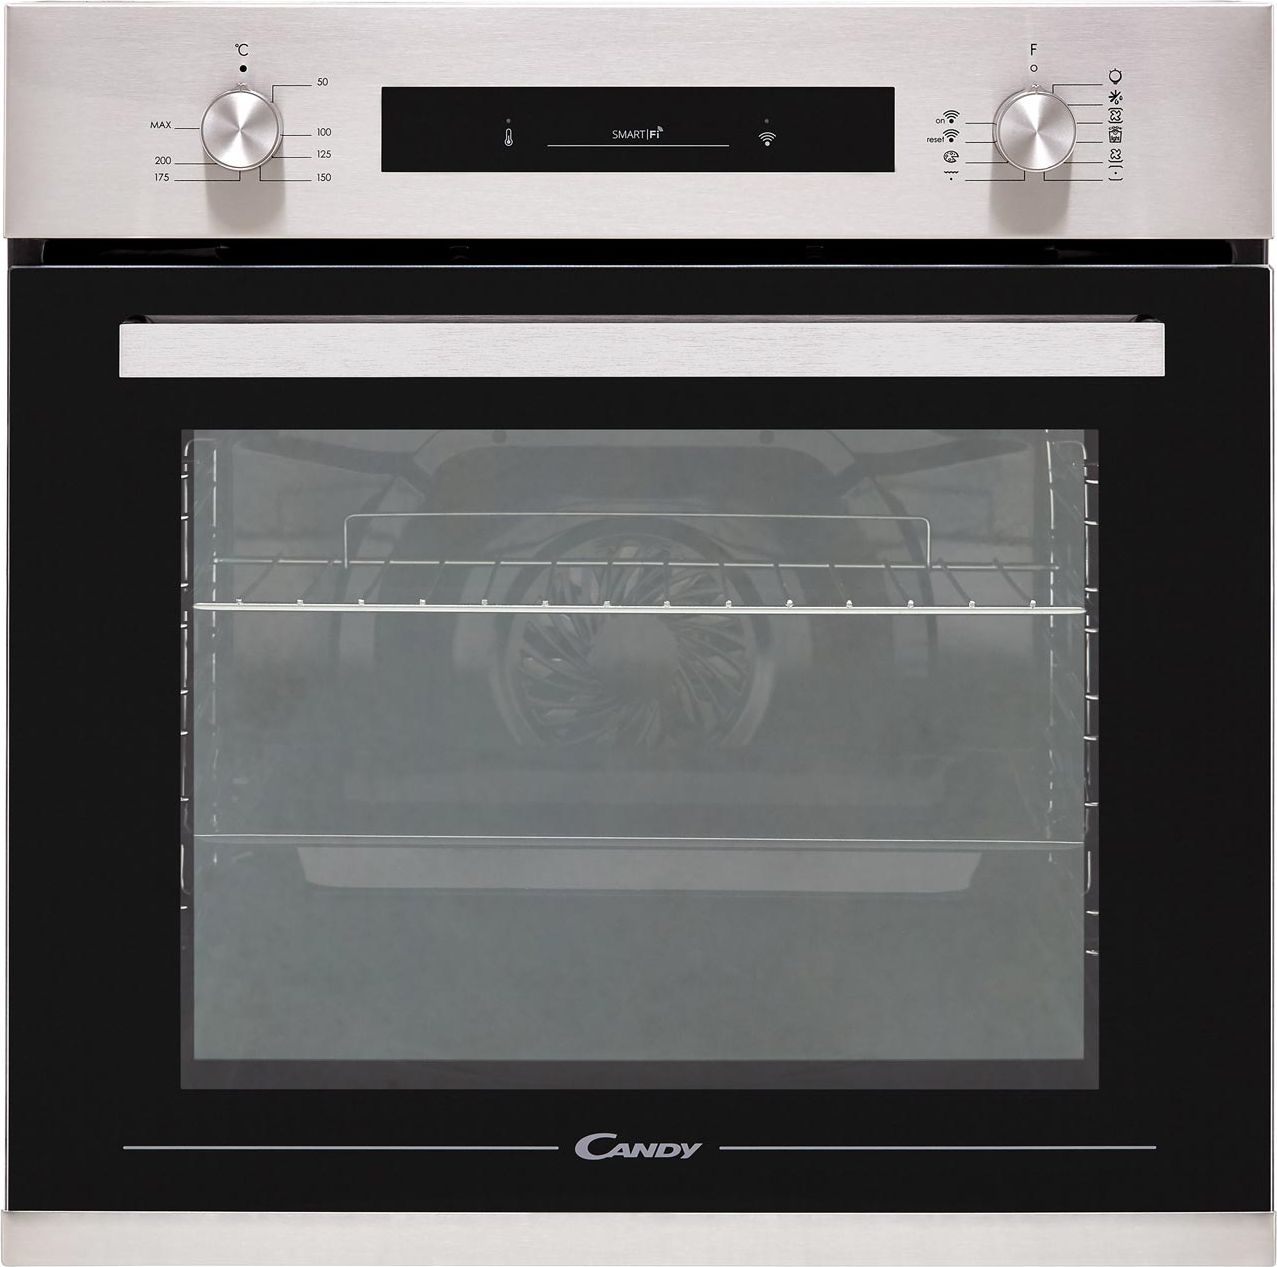 Candy FCP602XE0/E Wifi Connected Built In Electric Single Oven - Stainless Steel - A+ Rated, Stainless Steel